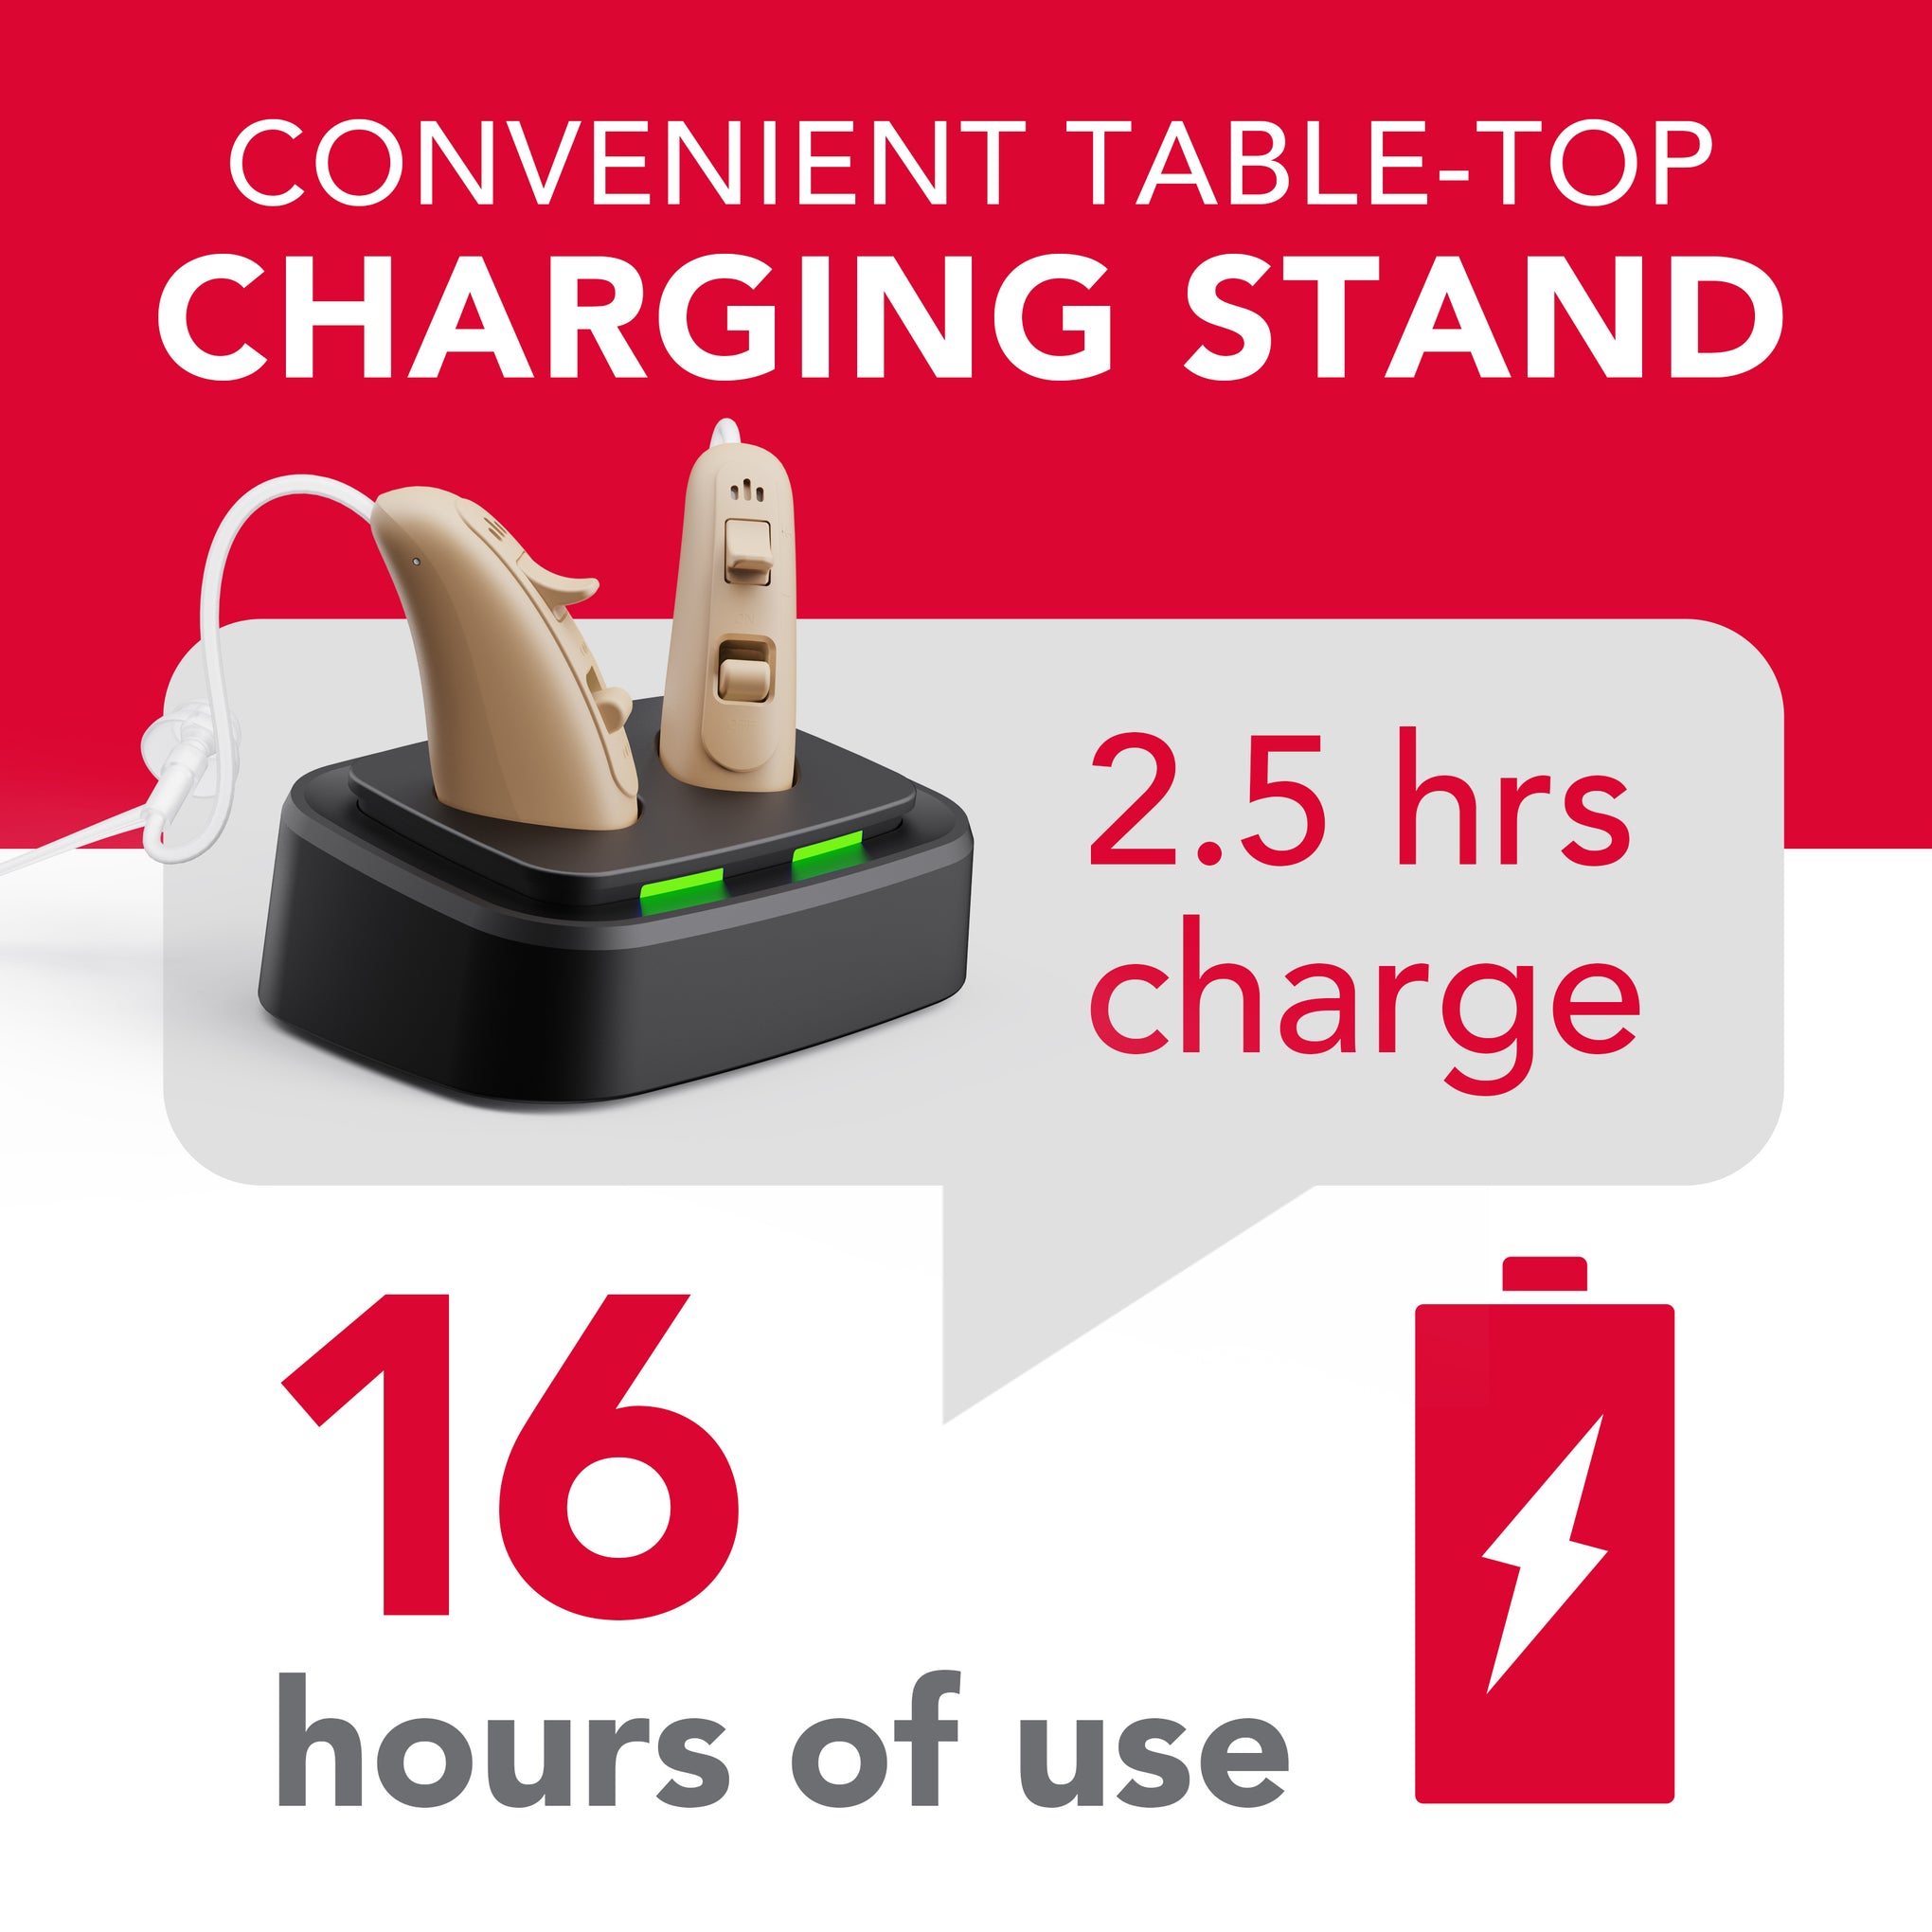 The RCA Behind-the-Ear Hearing Aids with Table-Top Charging Stand